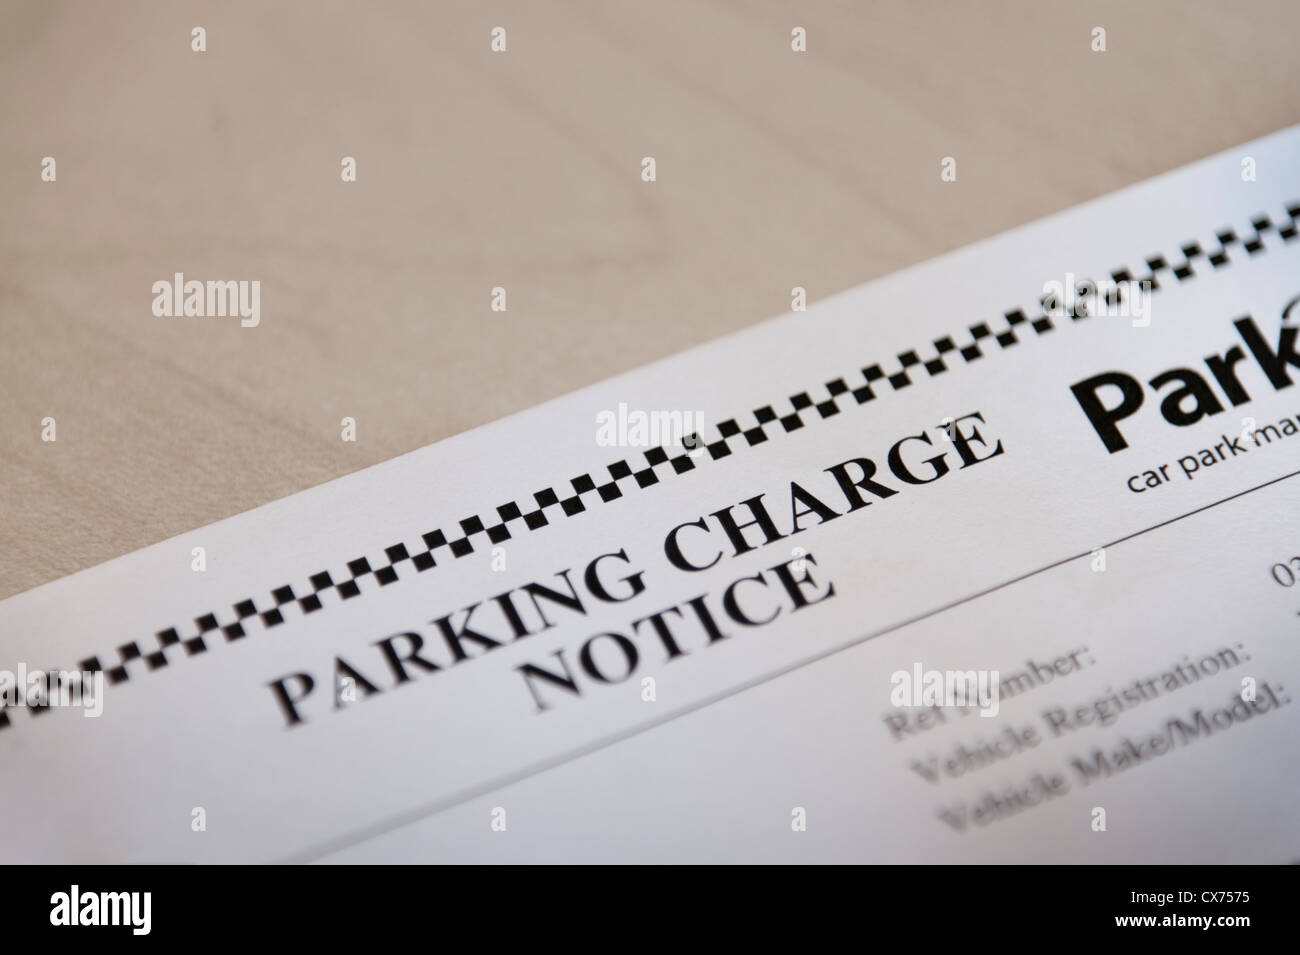 Parking Charge Notice Stock Photo